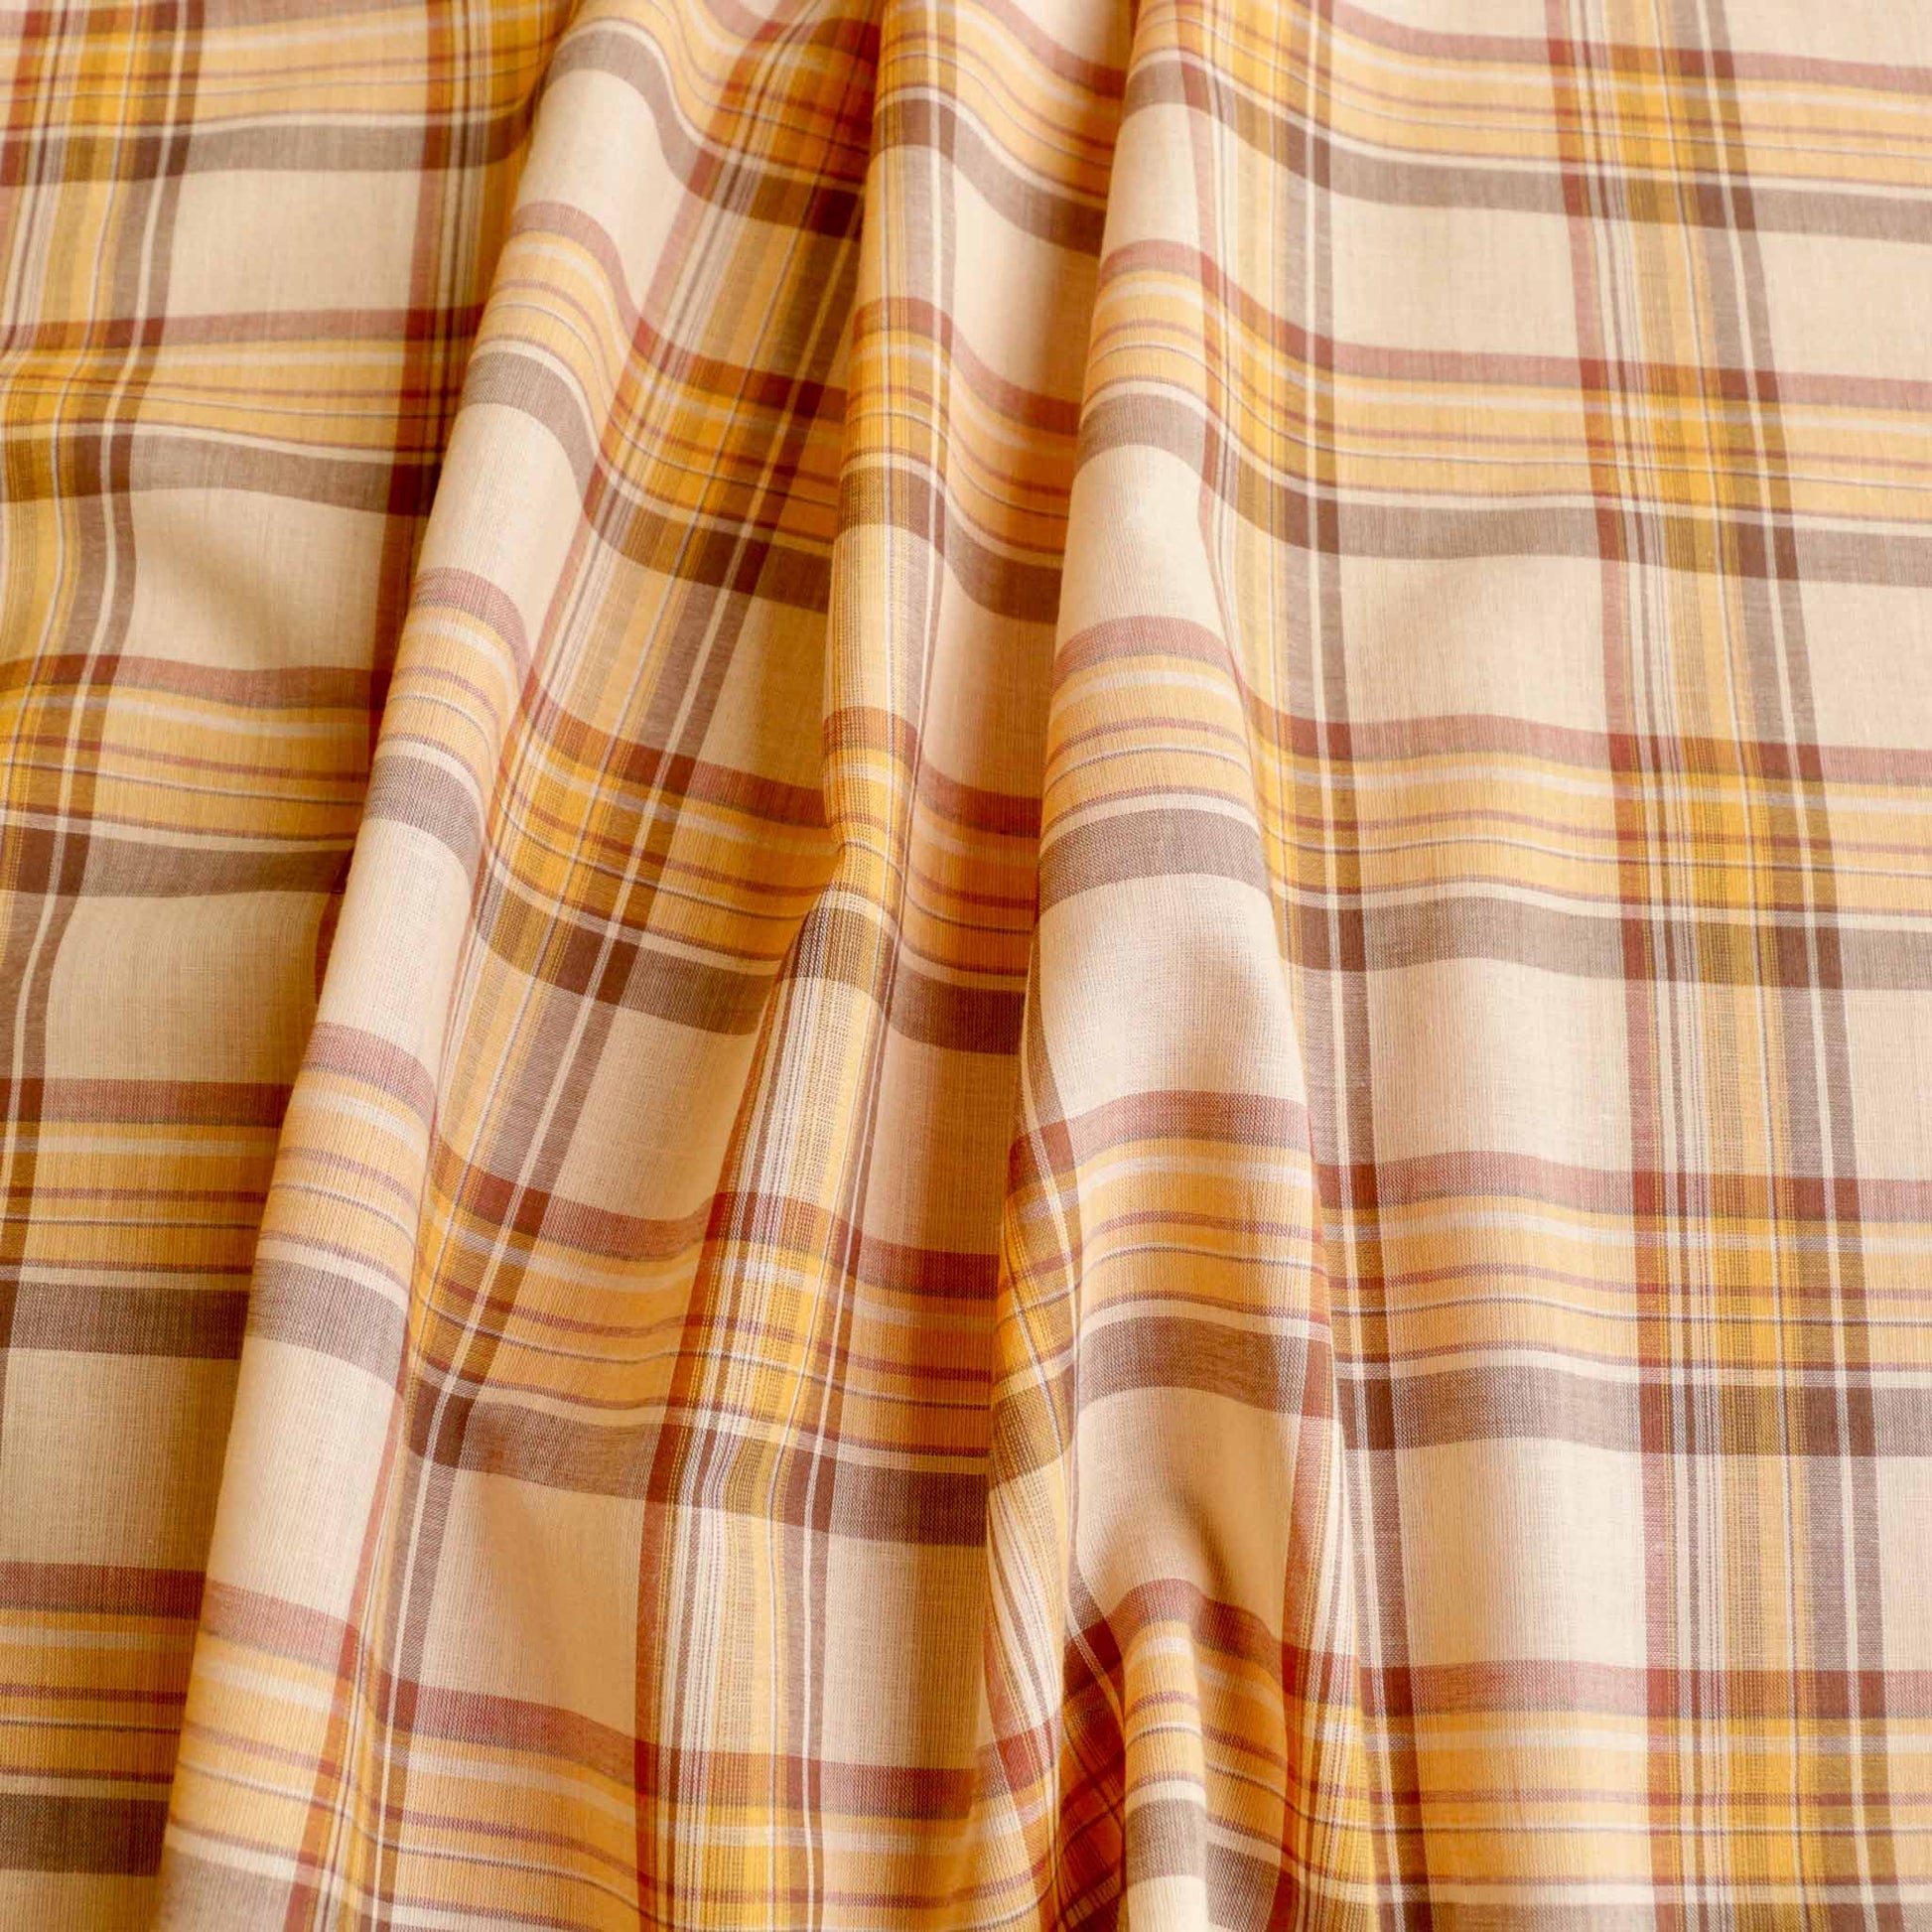 pale cotton voile dressmaking fabric with vintage style check print